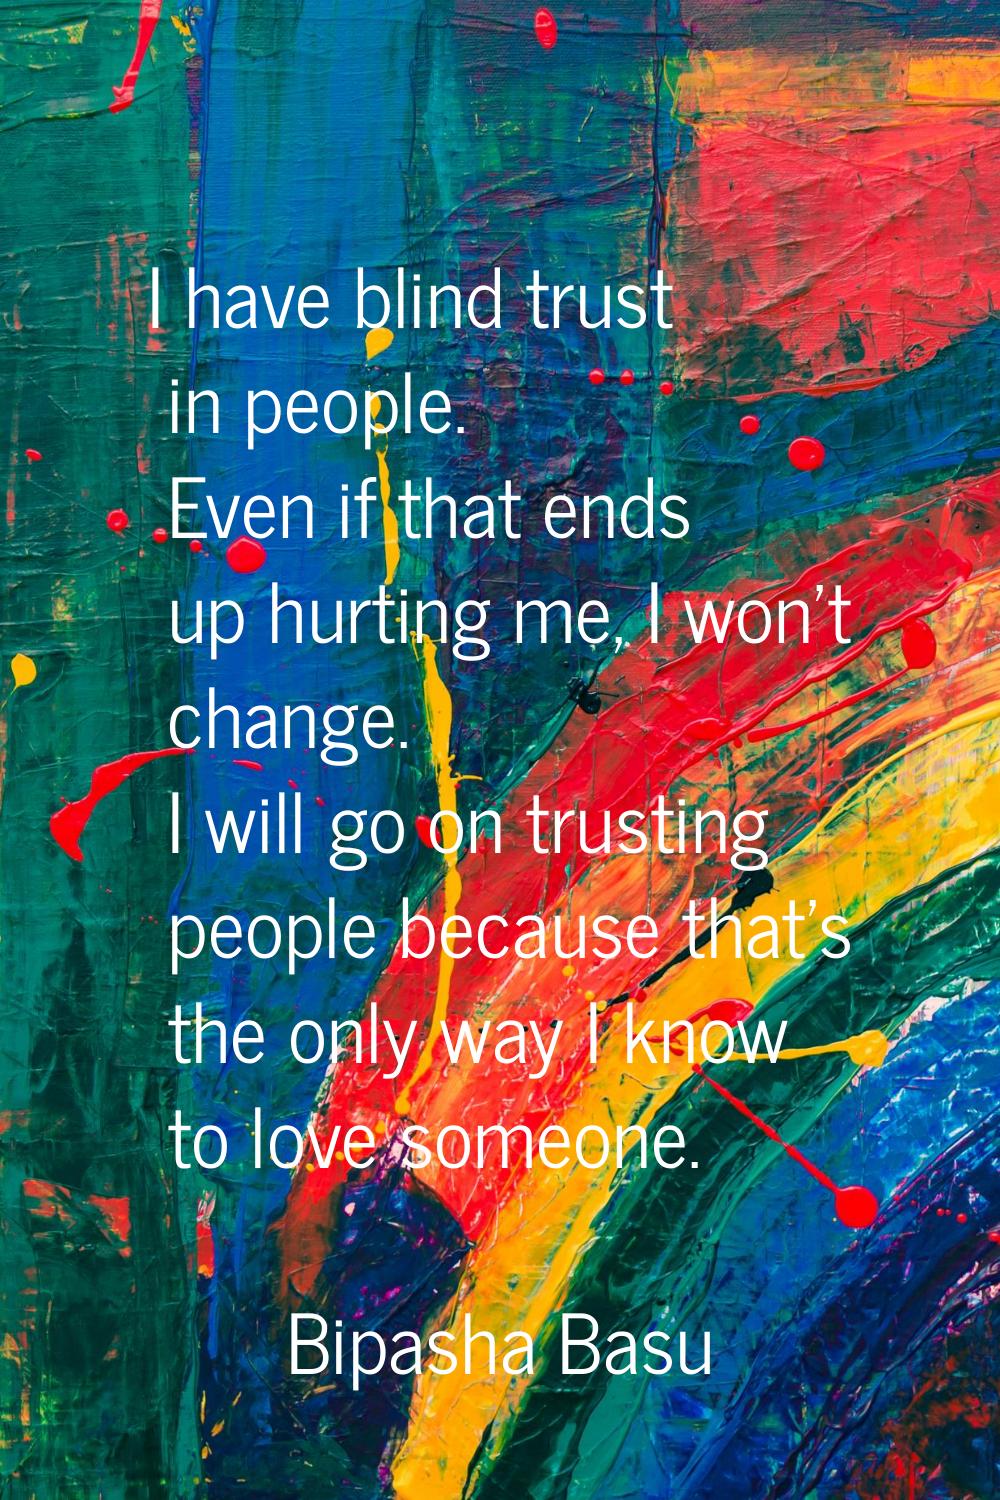 I have blind trust in people. Even if that ends up hurting me, I won't change. I will go on trustin